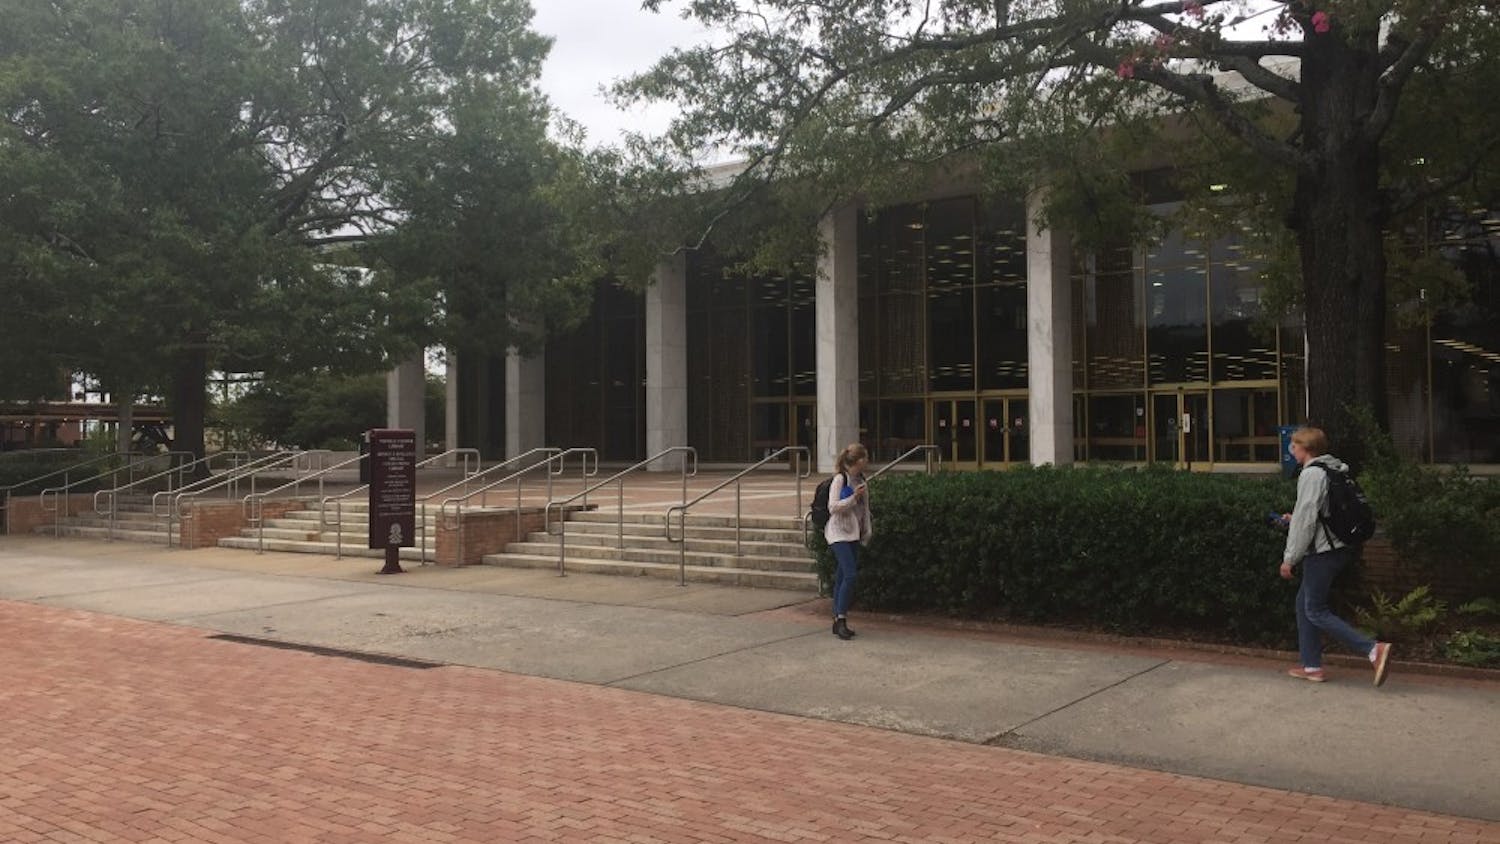 Thomas Cooper Library, along with other services for students, will remain open while campus is closed and classes are cancelled Wednesday to Friday, Oct. 5-7.